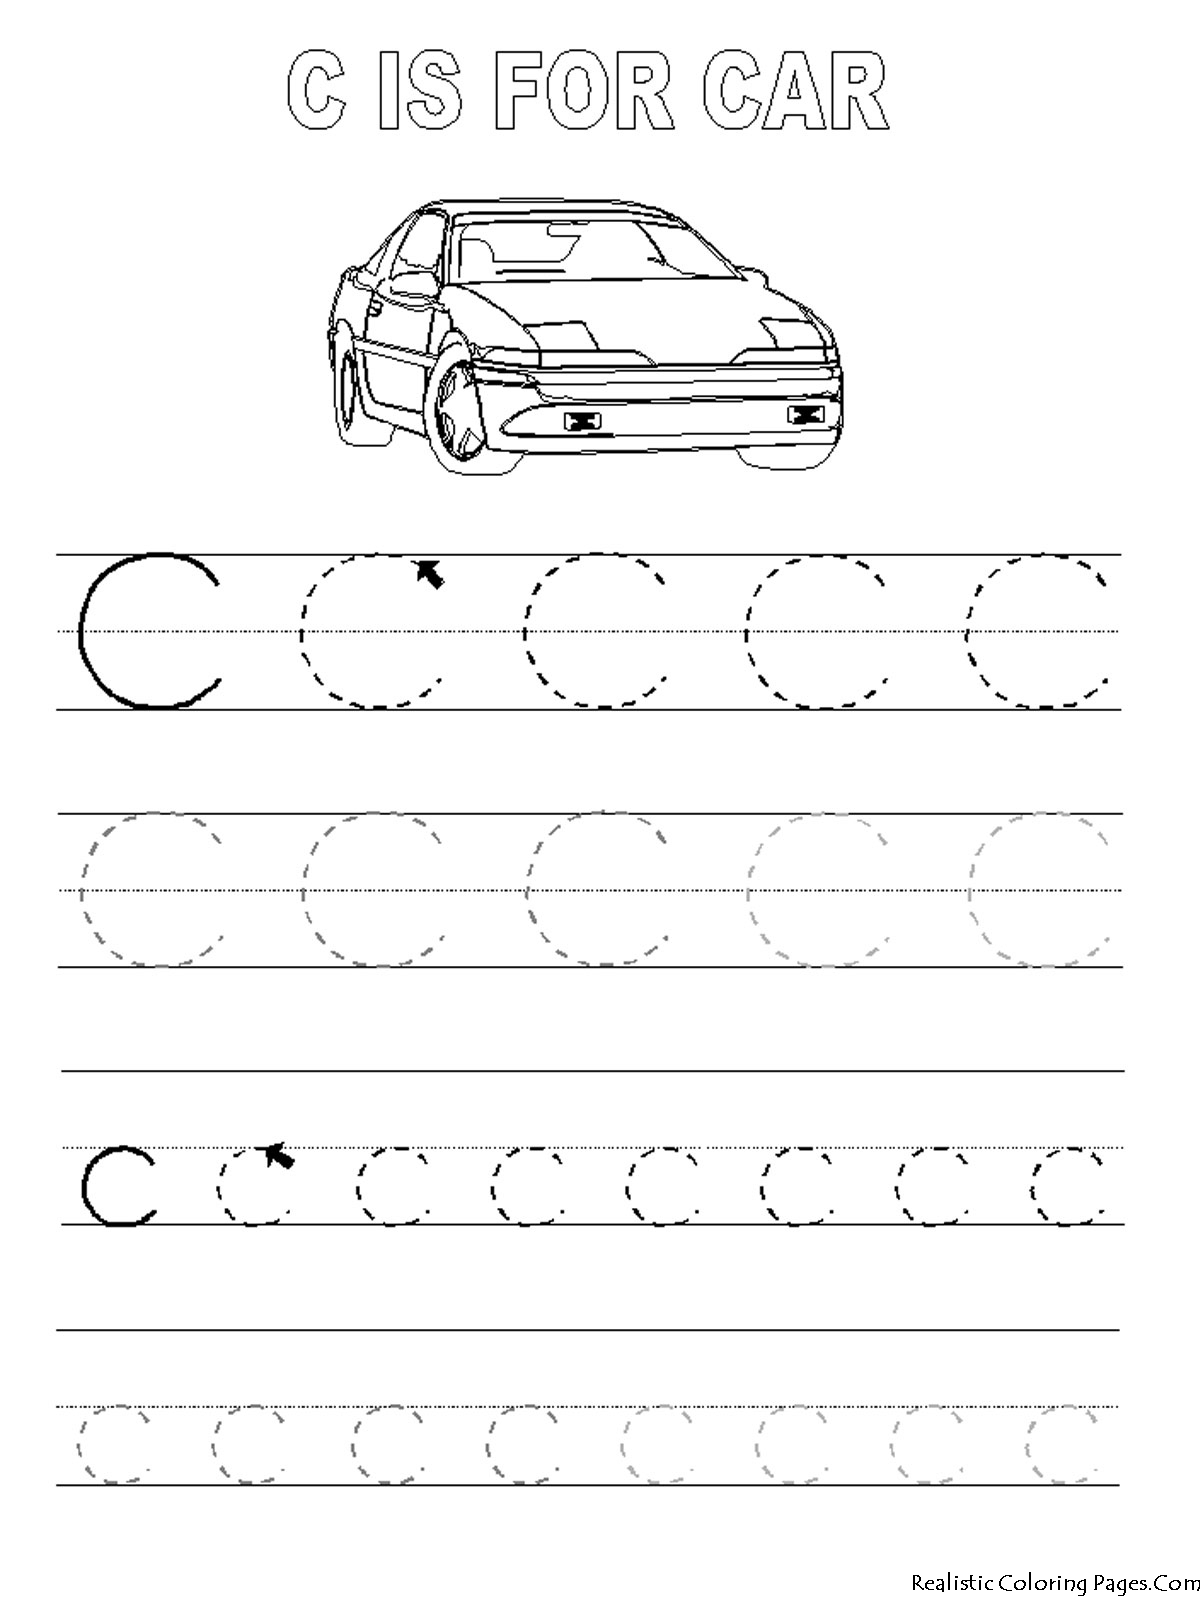 Tracing Letter C Coloring Pages Image